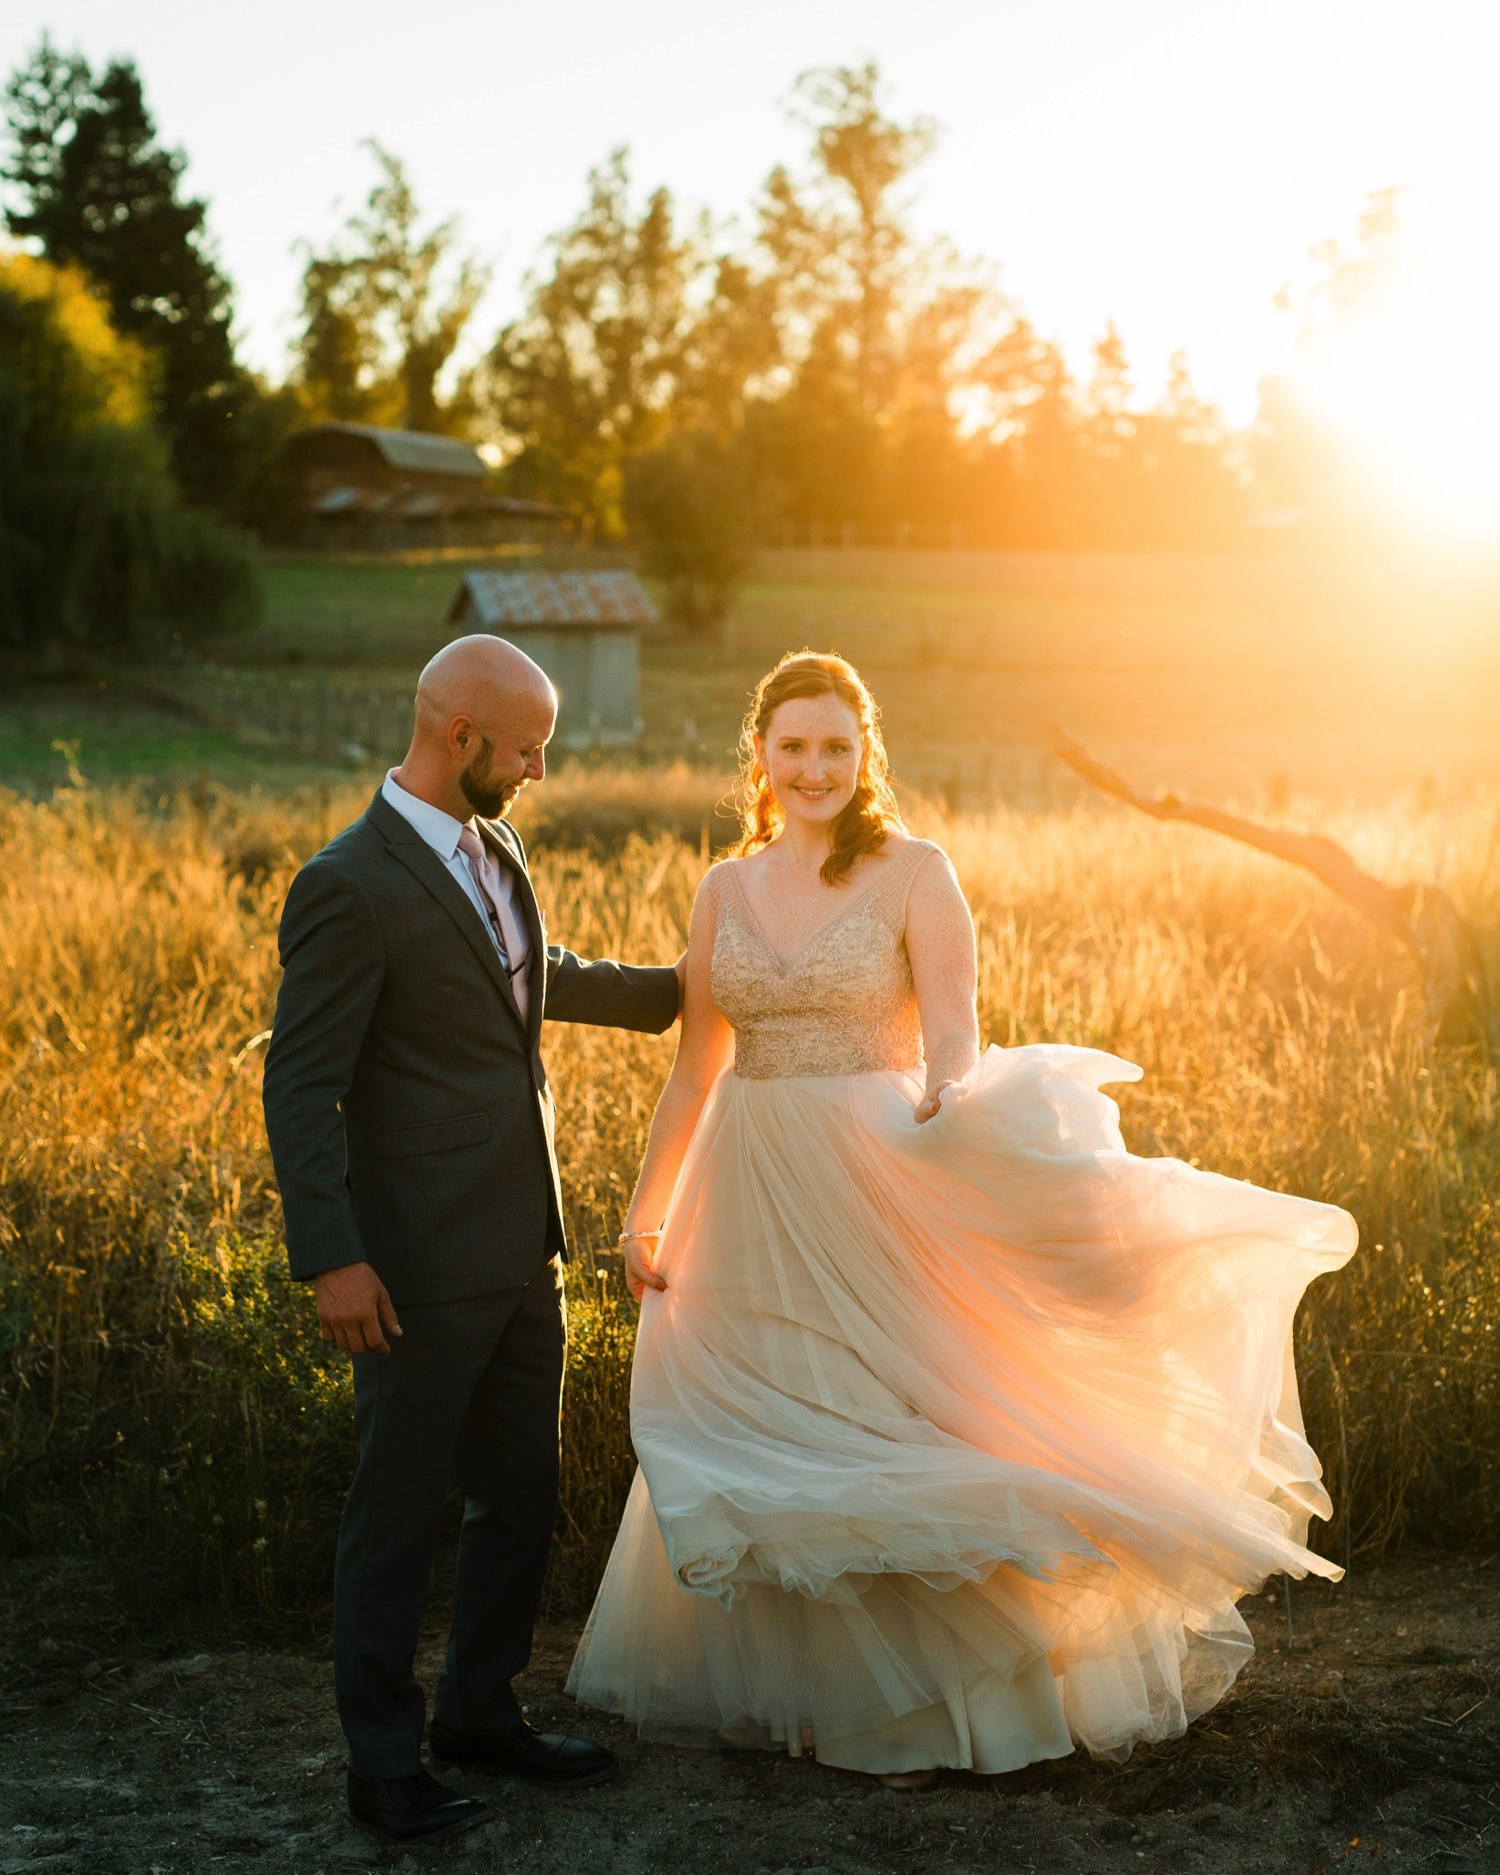 bride twirling at sova gardens in her dress while groom watches at sunset